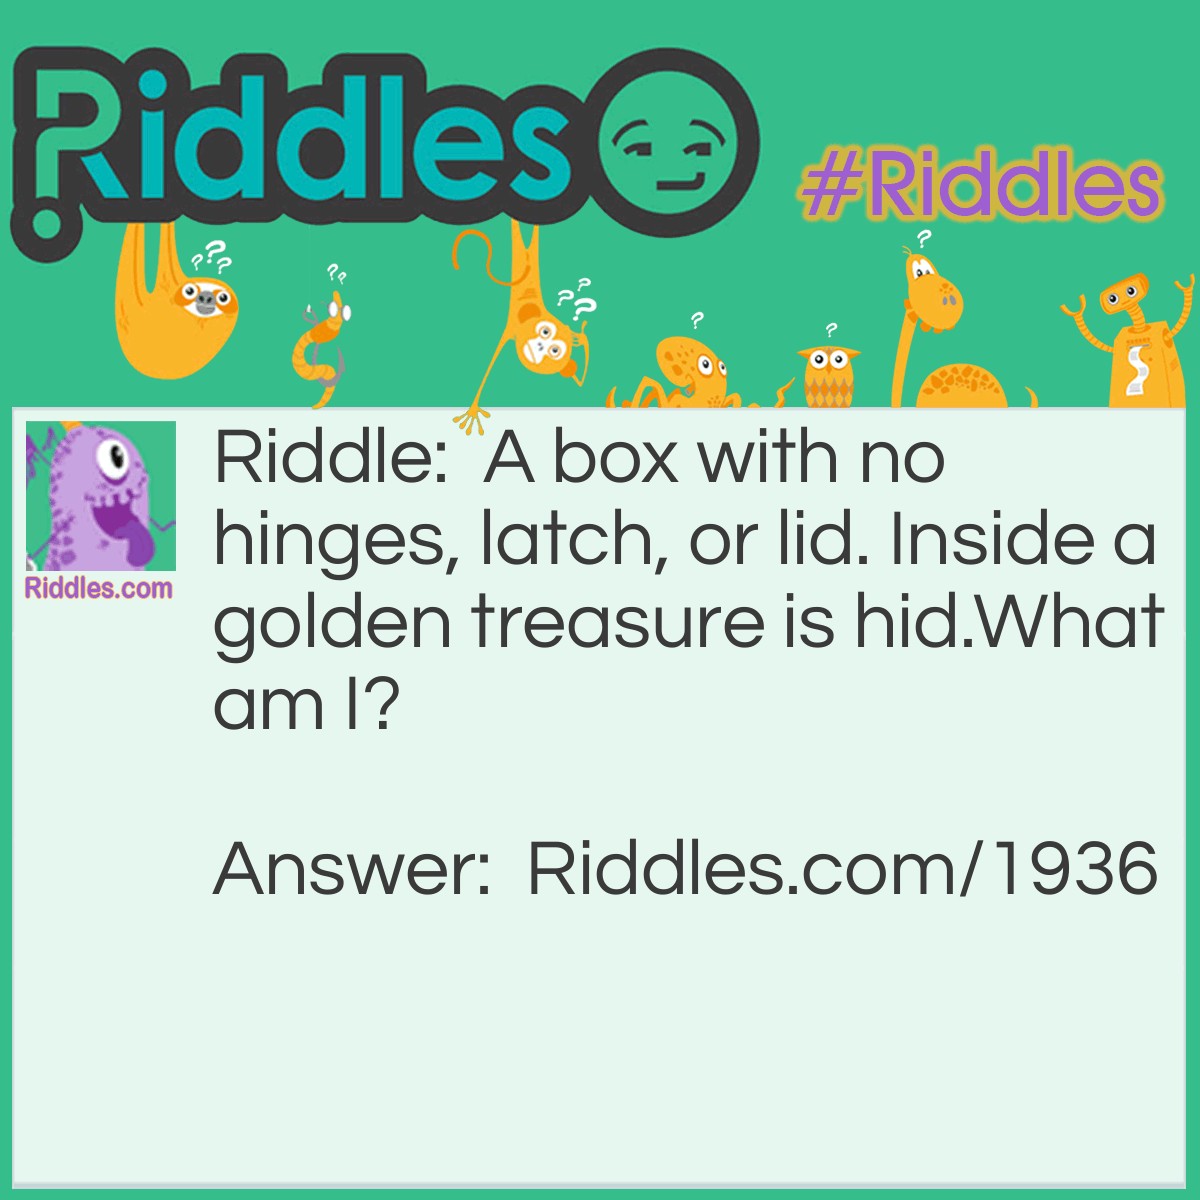 Riddle: A box with no hinges, latch, or lid. Inside a golden treasure is hid.
What am I? Answer: An egg.